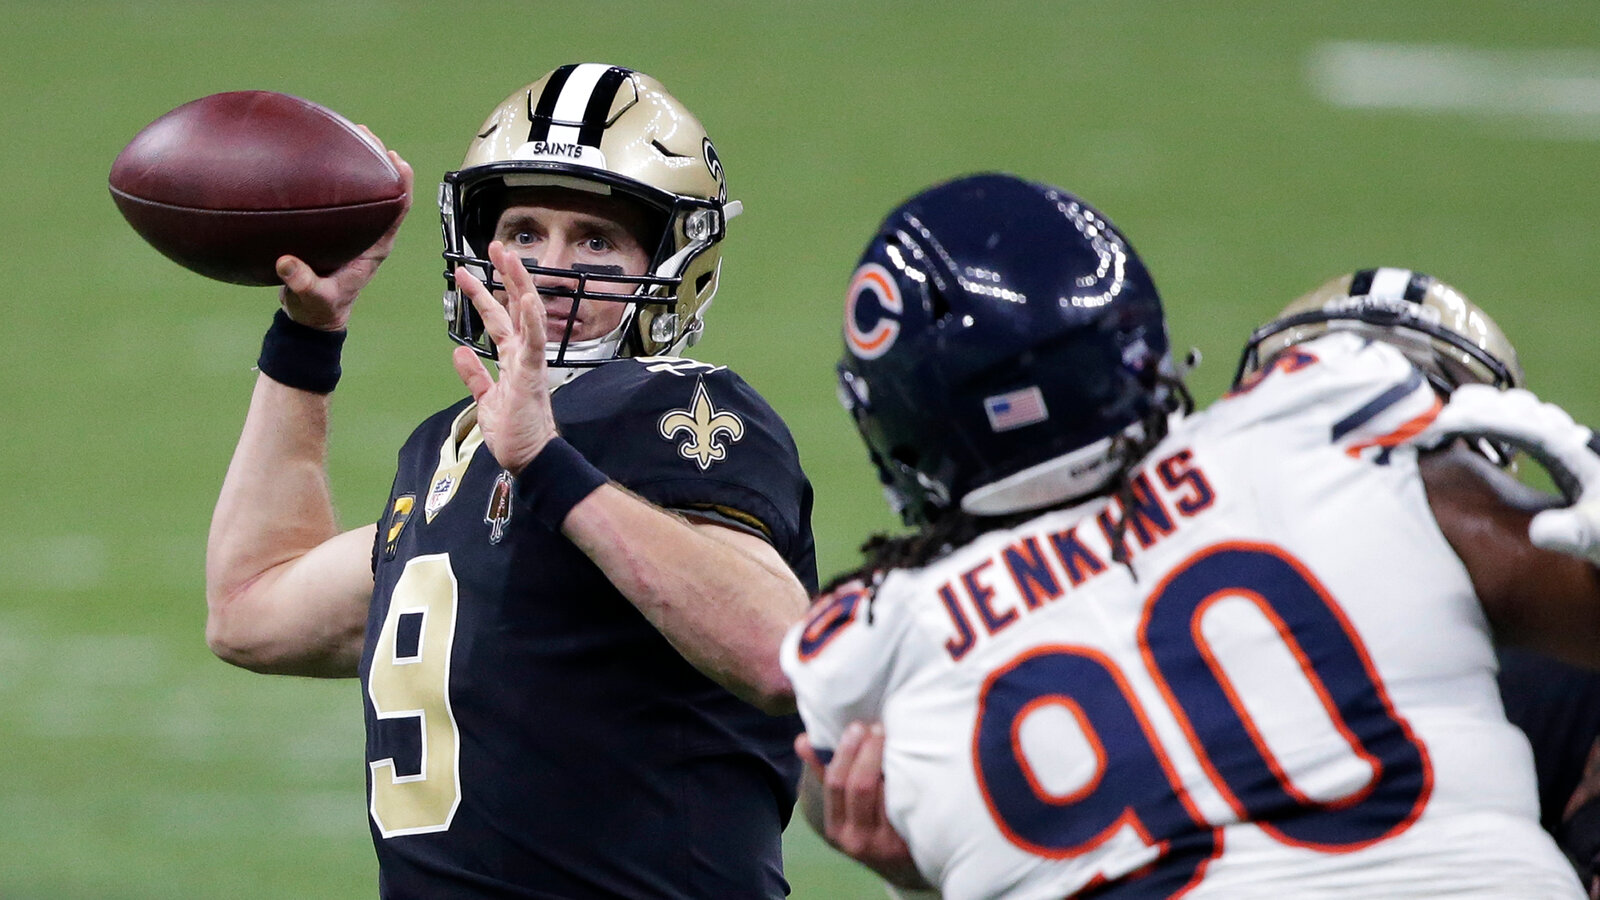 New Orleans Saints 21-9 win over Chicago Bears, will host Tampa Bay Buccaneers in NFC Divisional round